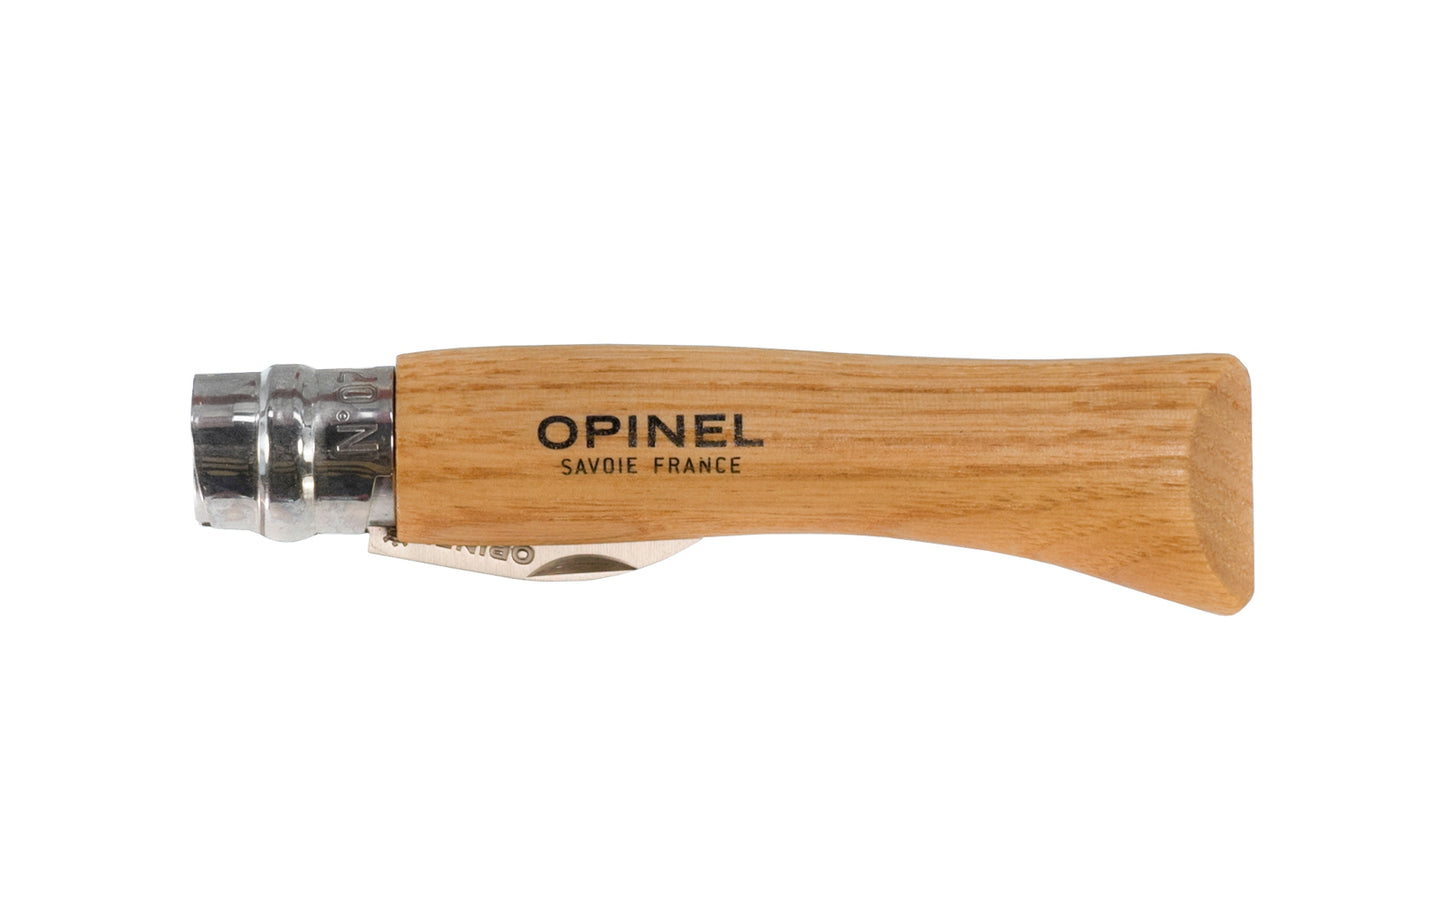 Made in France · Stainless Steel Chestnut & Garlic Knife. This Opinel No. 7 stainless knife is curved & pointed to easily pierce & peel chestnuts & garlic cloves, & can quickly stone fruits such as apricots or plums, etc. The folding knife is also a good tool for whittling wood. 2" long blade. 